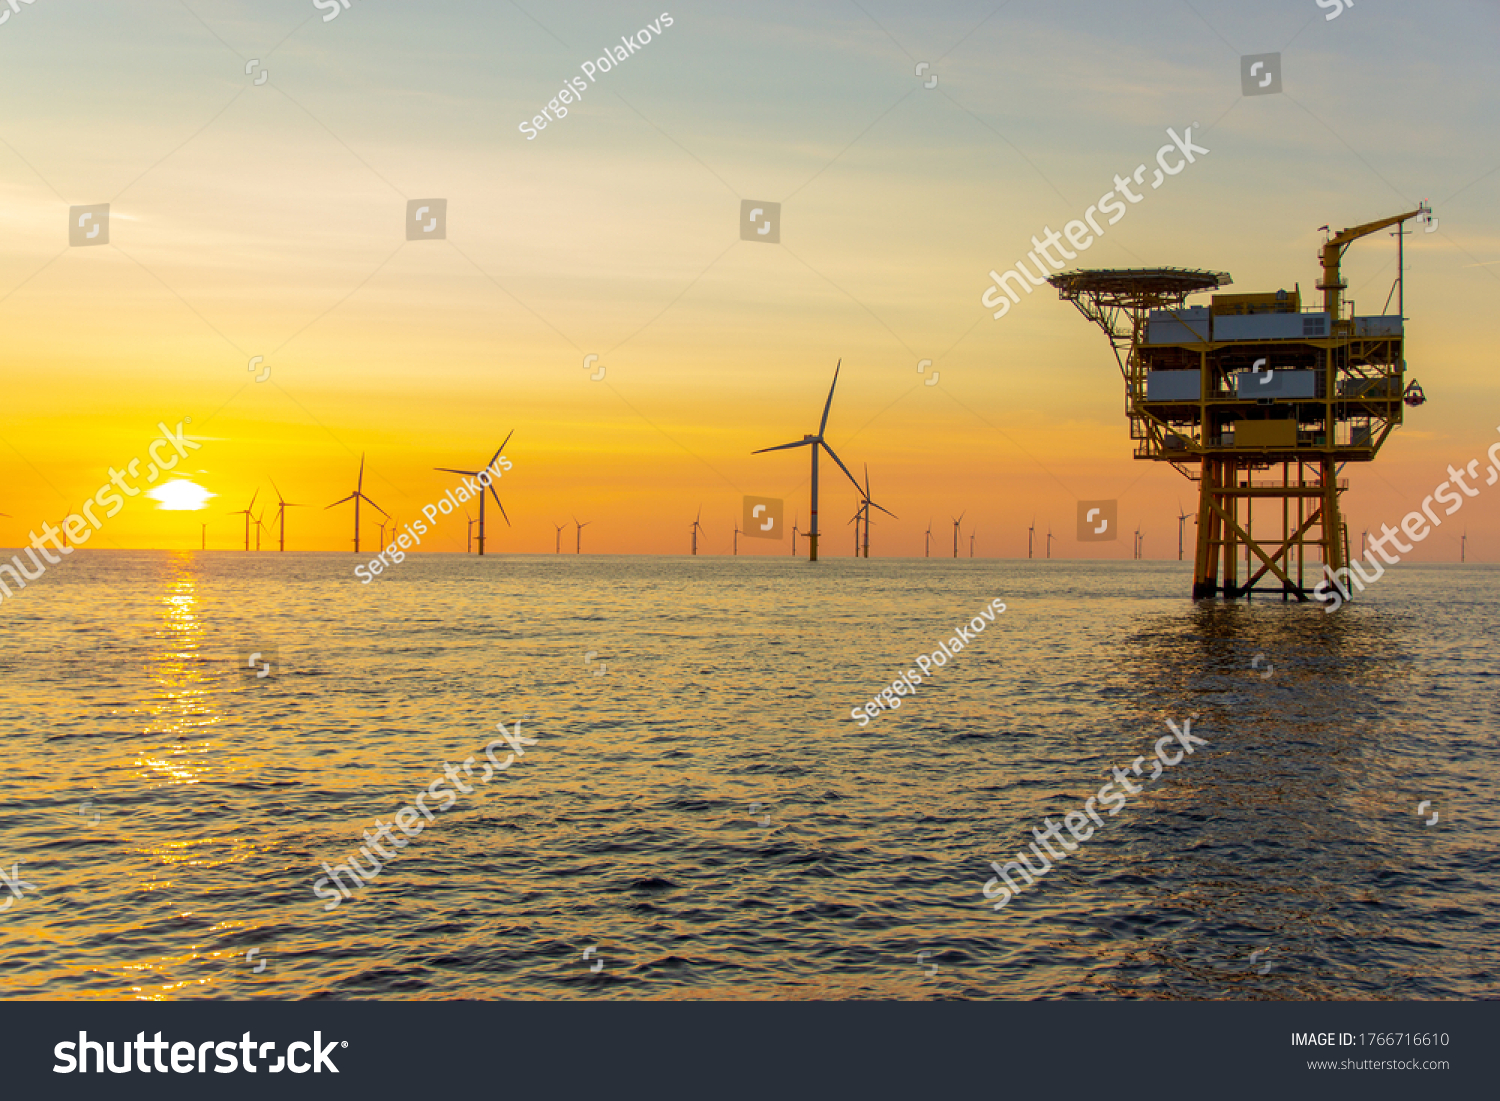 The beautiful sunset in the North Sea offshore wind farm #1766716610